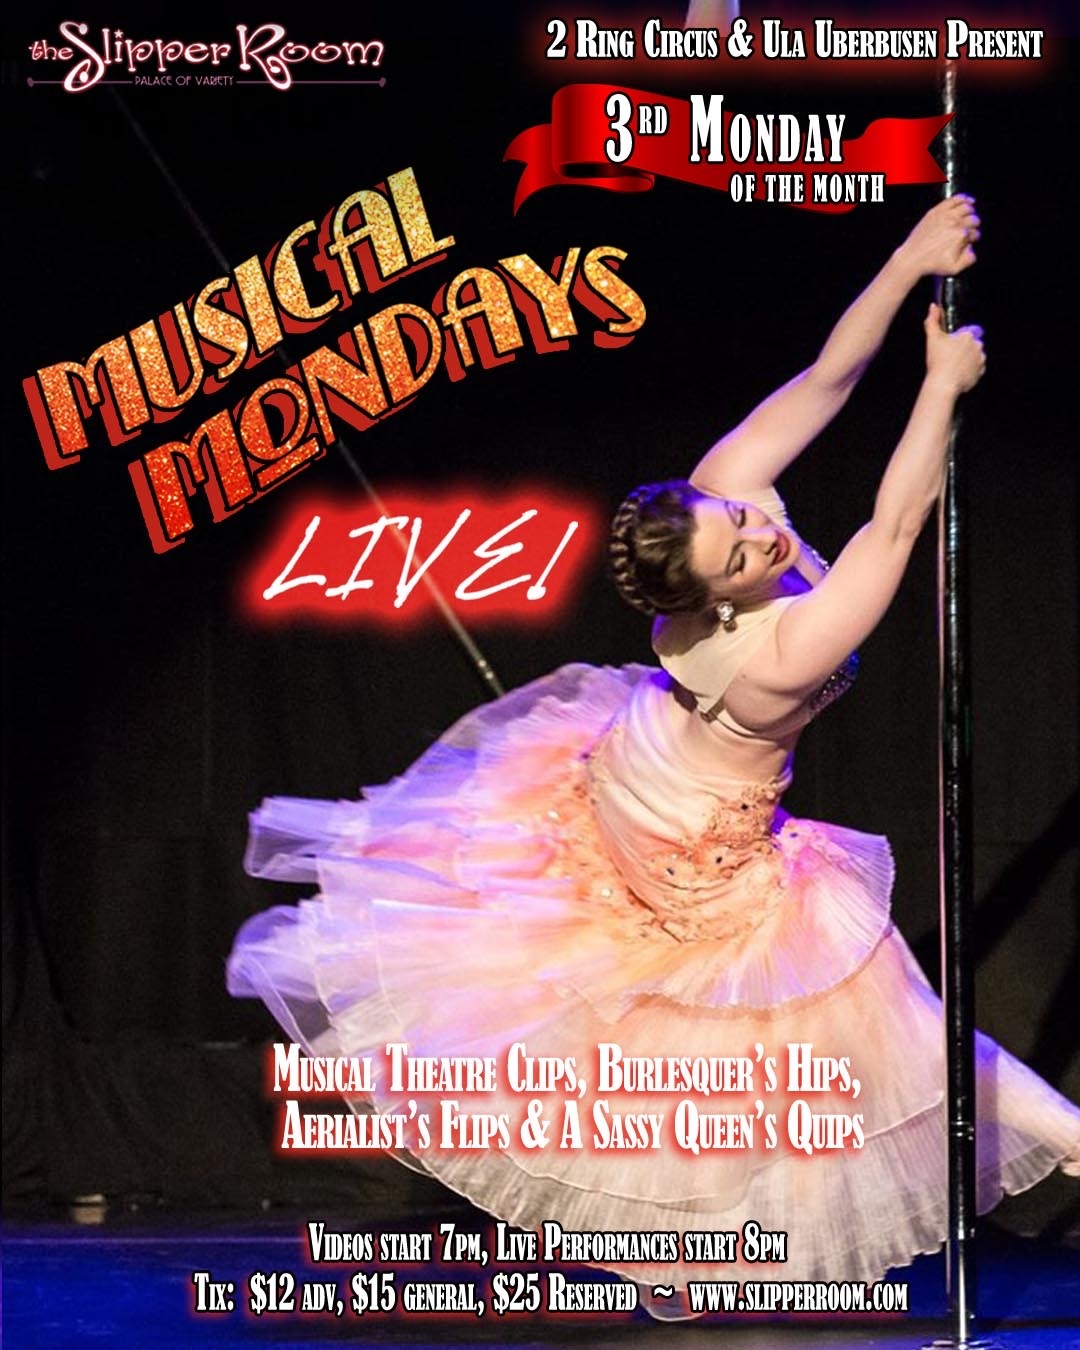 Monday, February 18th. Featuring the wildly talented Ivory Fox! ?????? Doors 7pm/Show 8pm. ?Musical Theatre Clips, Burlesquer?s Hips, Aerialist?s Flips, & A Sassy Queen?s Quips? Discounted advance tickets at ? slipperroomnyc(dot)com ????? #musicalmondayslive is presented by @ulauberbusen & @2ringcircus and continues on the 3rd Monday of the month at the @slipperroomnyc. The February 18 edition features performances by @eve.starr @iambenfranklin @aerialjosh @ulauberbusen @mr.jackbarrow & @_theivoryfox_ ??? #musicalmondays #live #burlesque #boylesque #nycburlesque #cabaret #dragqueen #nycdrag #nycnightlife #burlesqueshow #singalong #broadway #musicaltheatre #showtunes #2ringcircus #nyc #circus #aerial #thingstodonyc #mondaynight #slipperroom #slipperroomnyc #liveentertainment